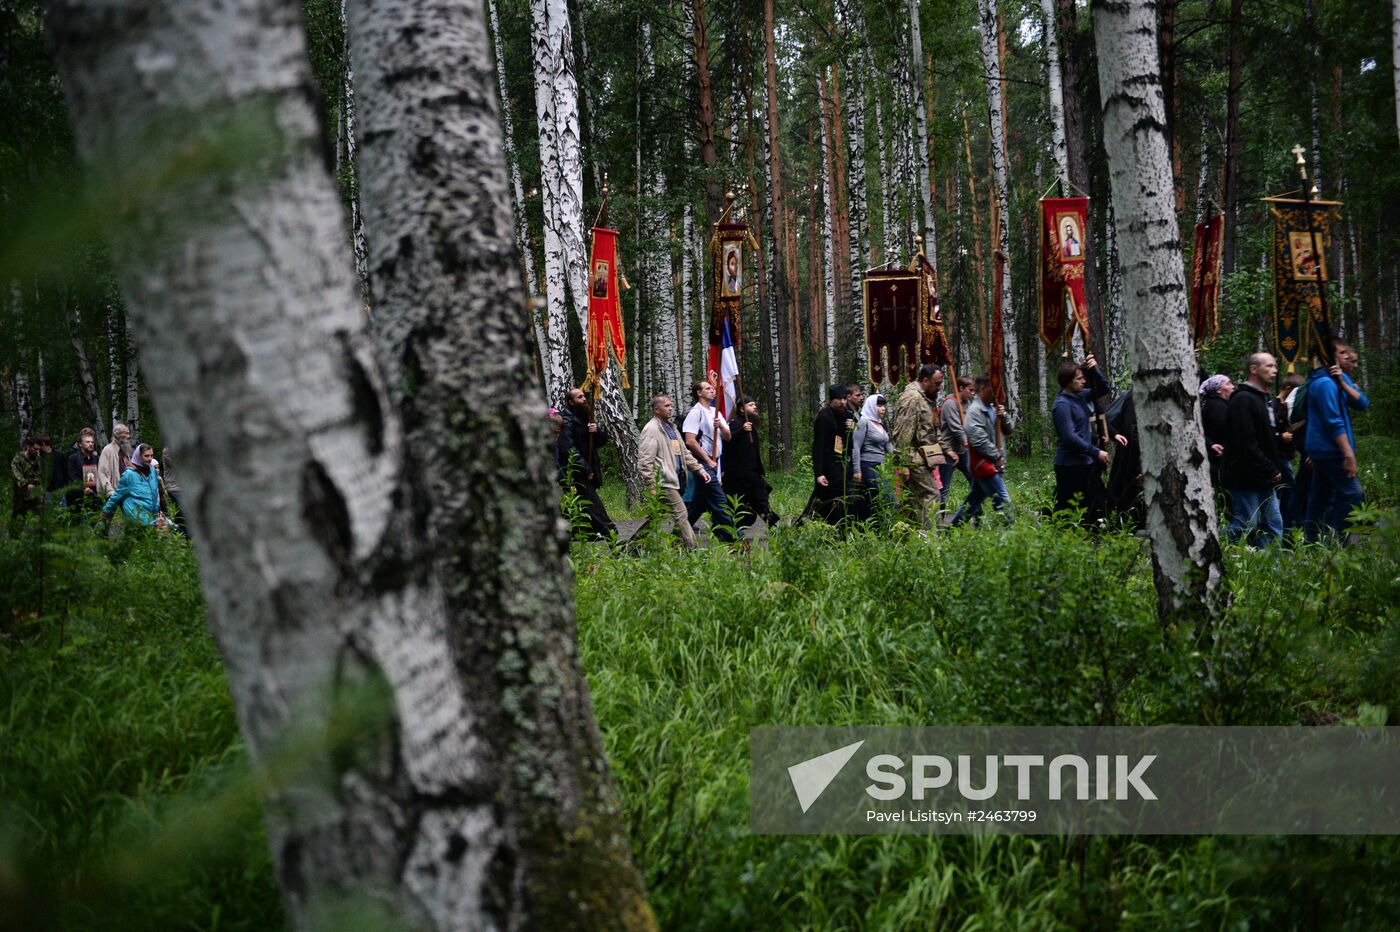 Religious procession in memory of Russian Royal Family executed in Yekaterinburg